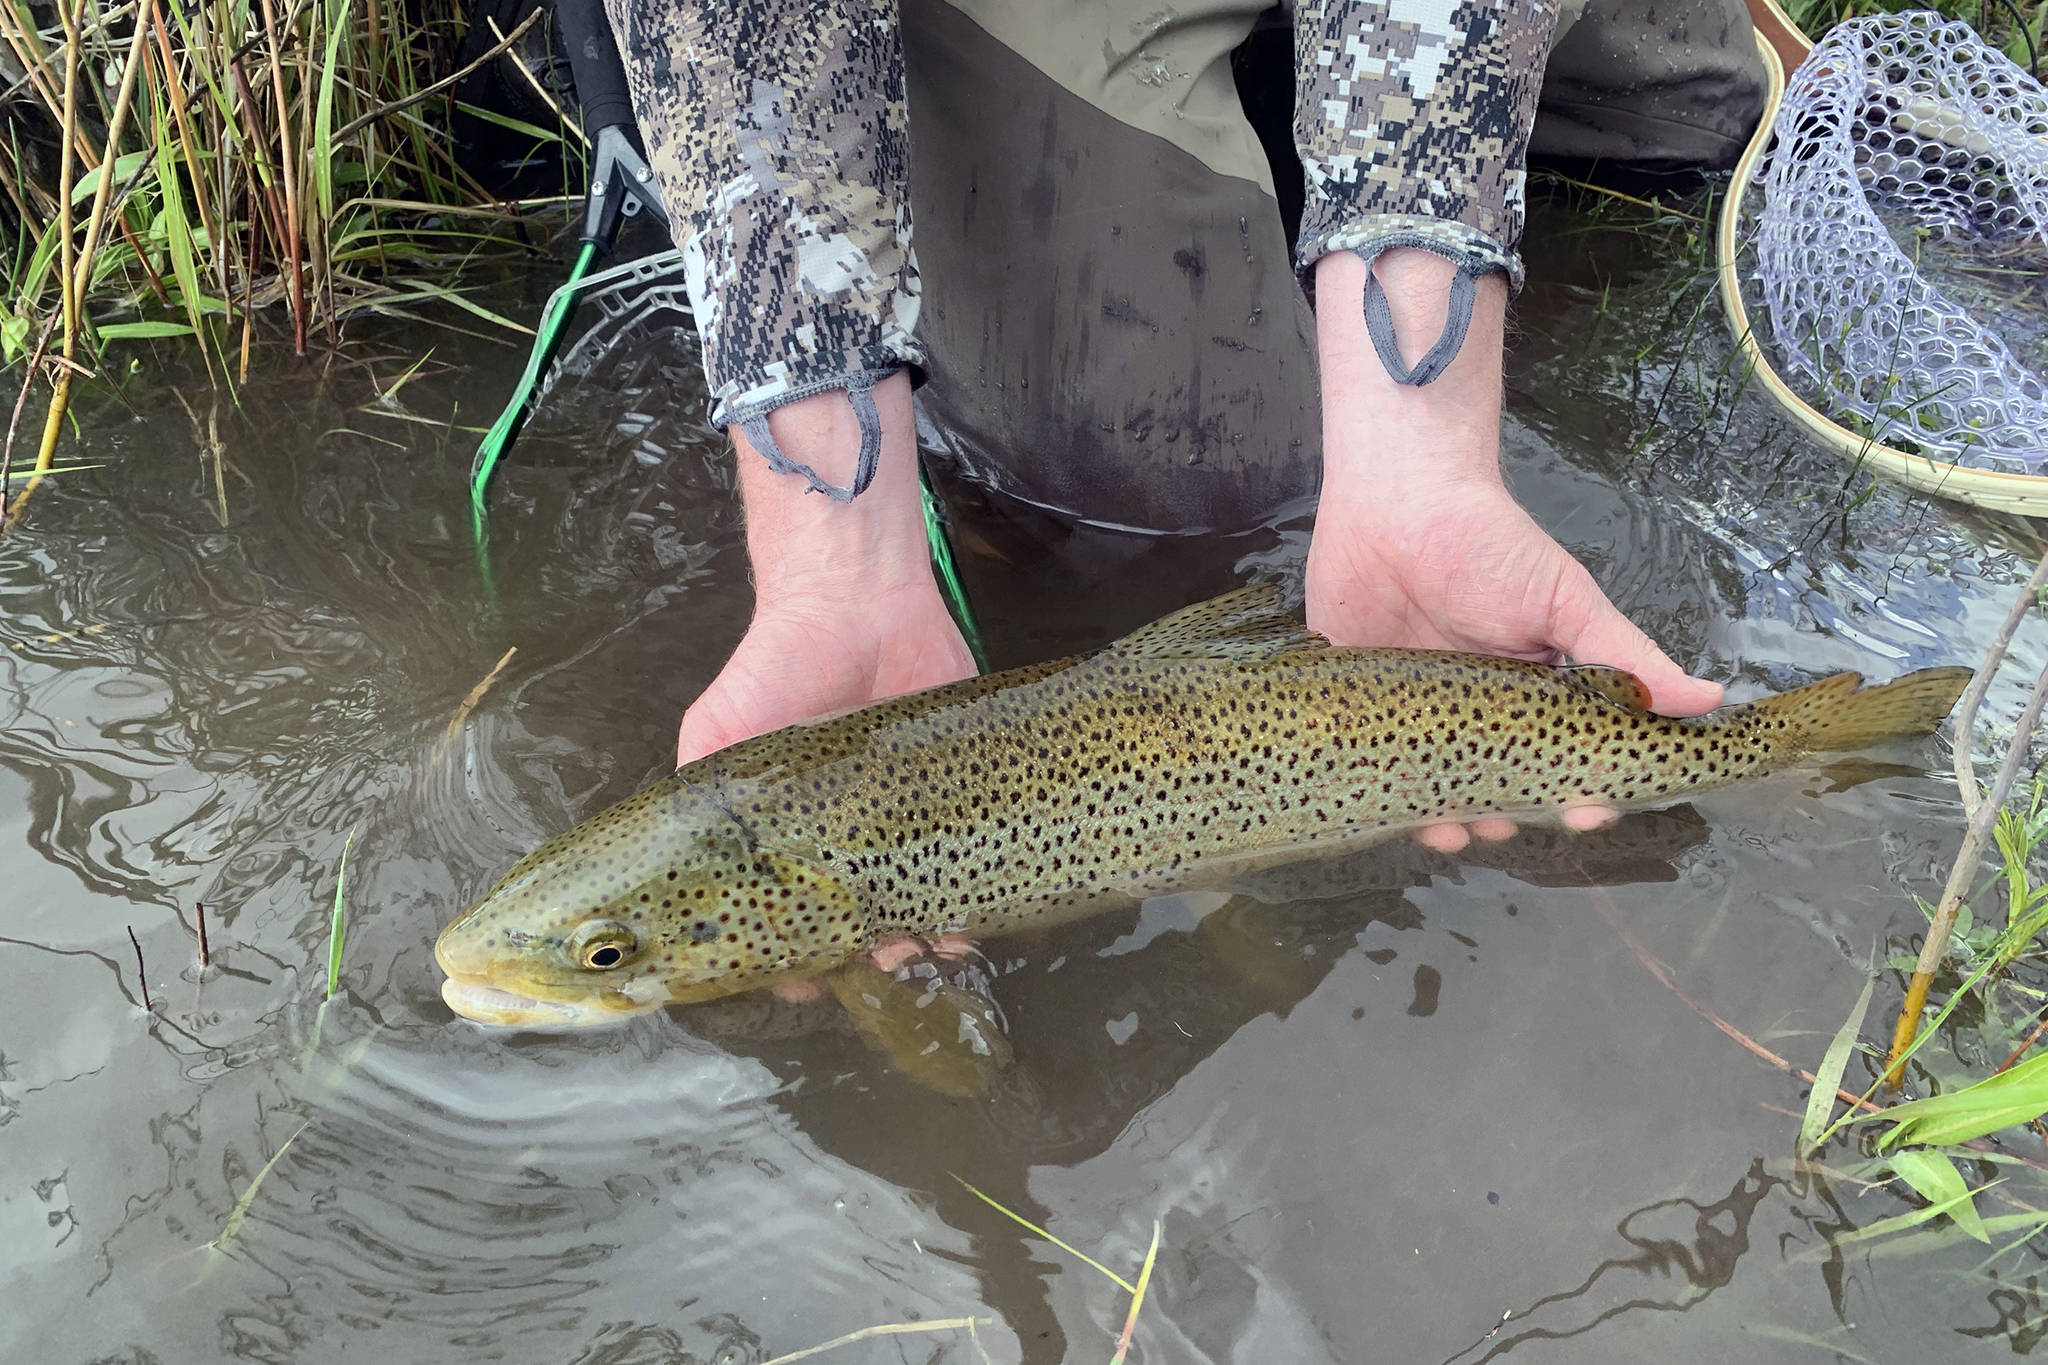 The author is playing the role of traveling angler, trying to get the best of what Wyoming has to offer, while others head to Alaska for the fish of a lifetime. (Courtesy photo | Jeff Lund)